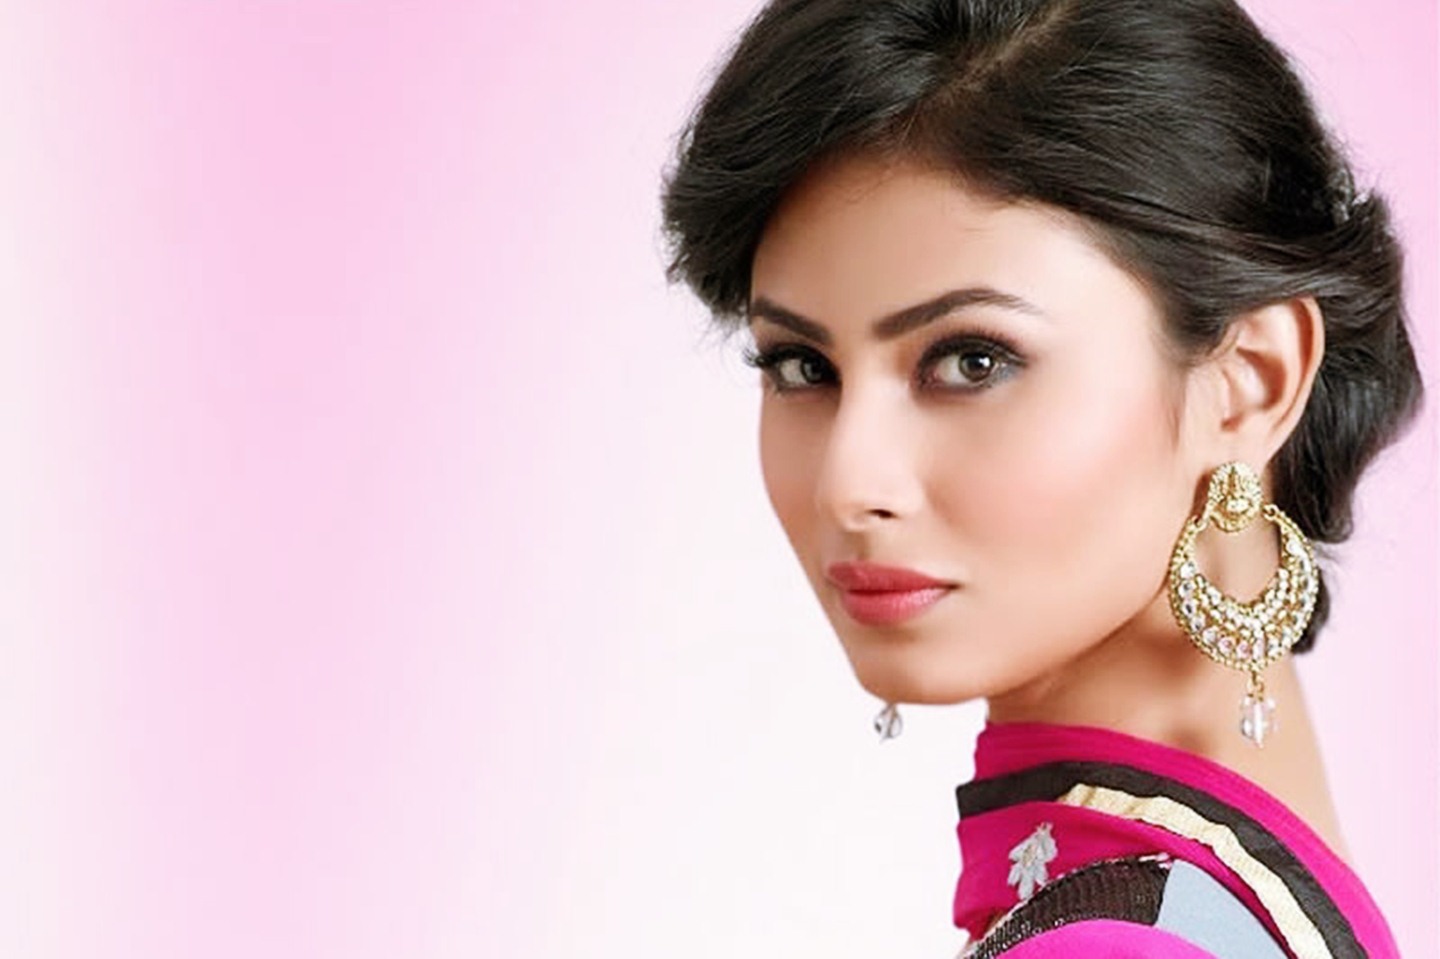 Mouni-Roy-Wallpaper-Hd-pics-photos-pictures-images-full-details